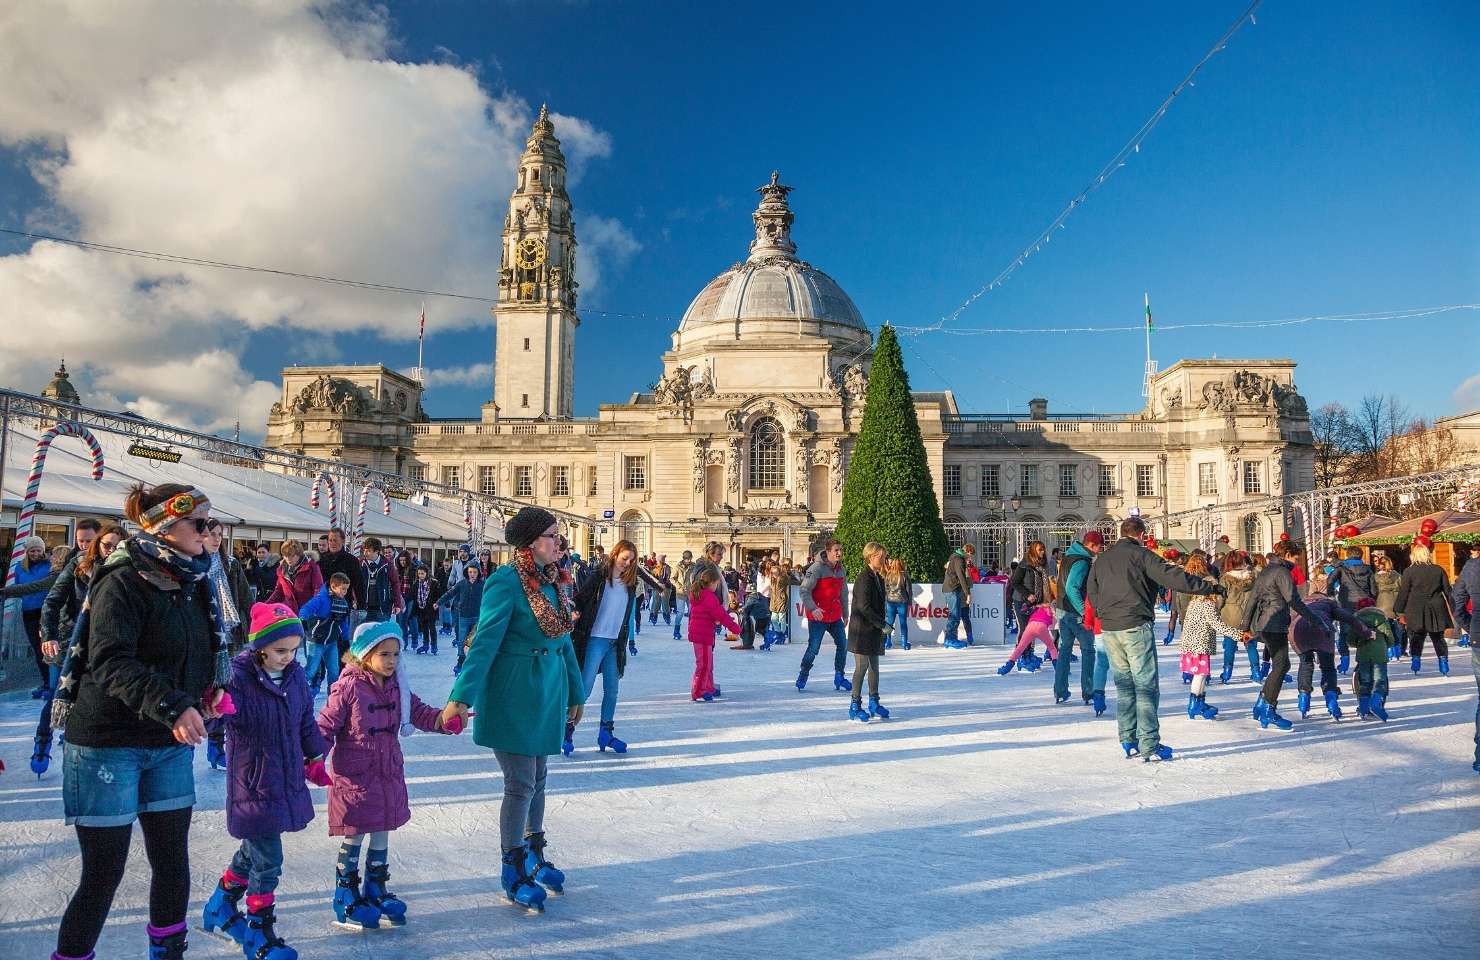 The Best Ice Skating Spots In The UK